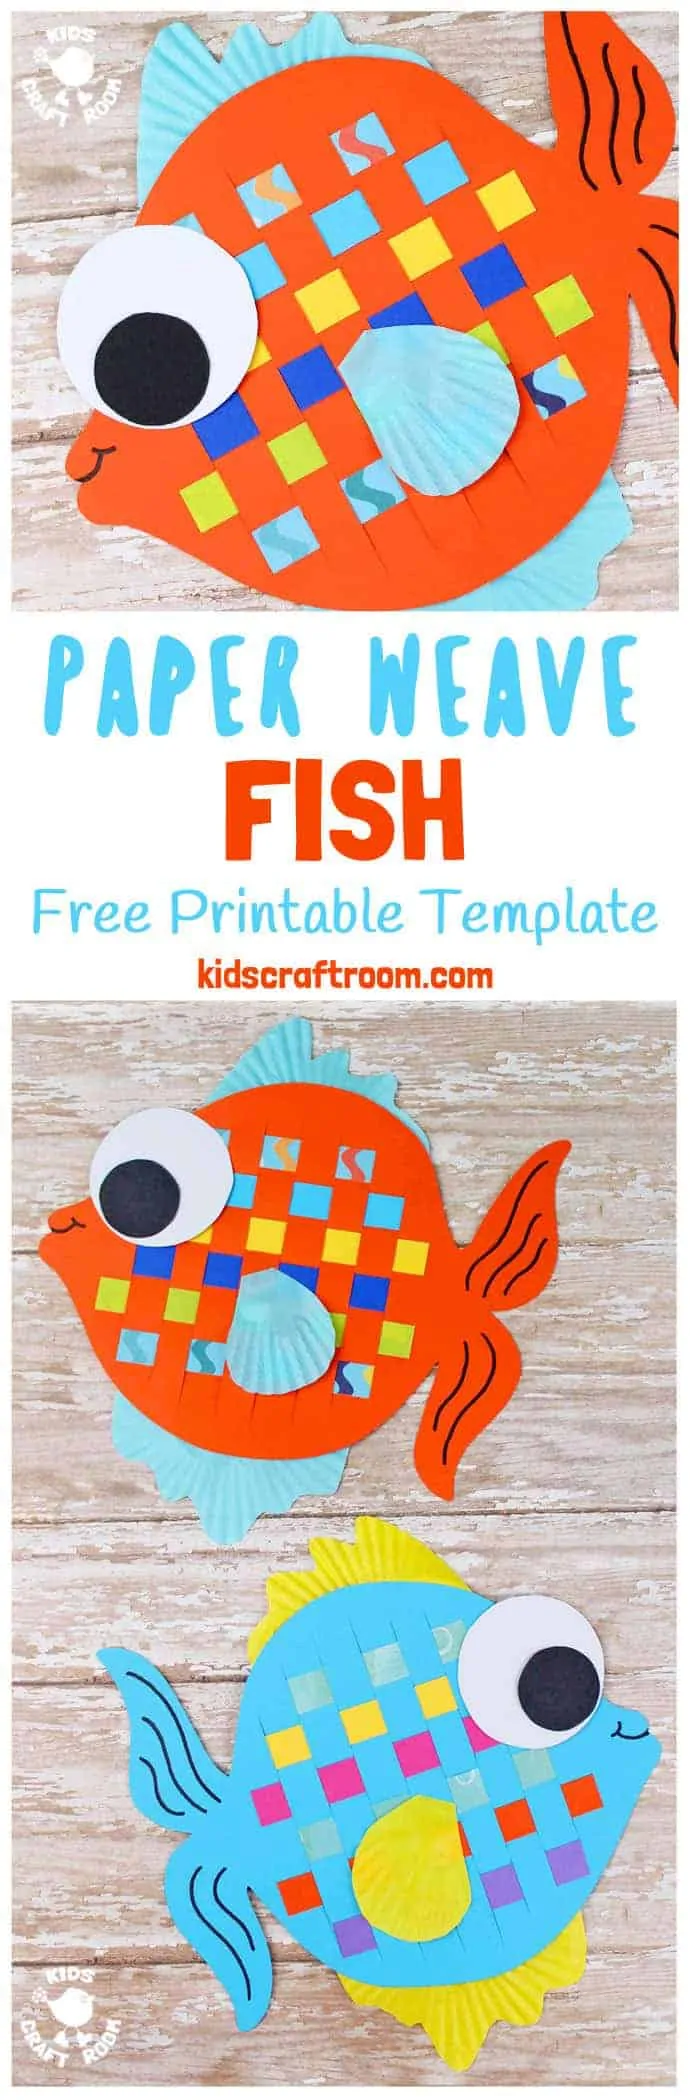 Here's a Paper Weaving Fish Craft that's perfect for Summer. These colourful fish are super fun to make and a great way to introduce kids to some simple weaving. To help keep things easy we've got a free printable template for you too. (It also doubles up as a fish colouring sheet, so you can enjoy twice the fun!) #fish #summercrafts #paperweaving #kidscrafts #kidsactivities #fishcrafts #craftsforkids #papercrafts #printables #freeprintables #weaving #kidscraftroom 